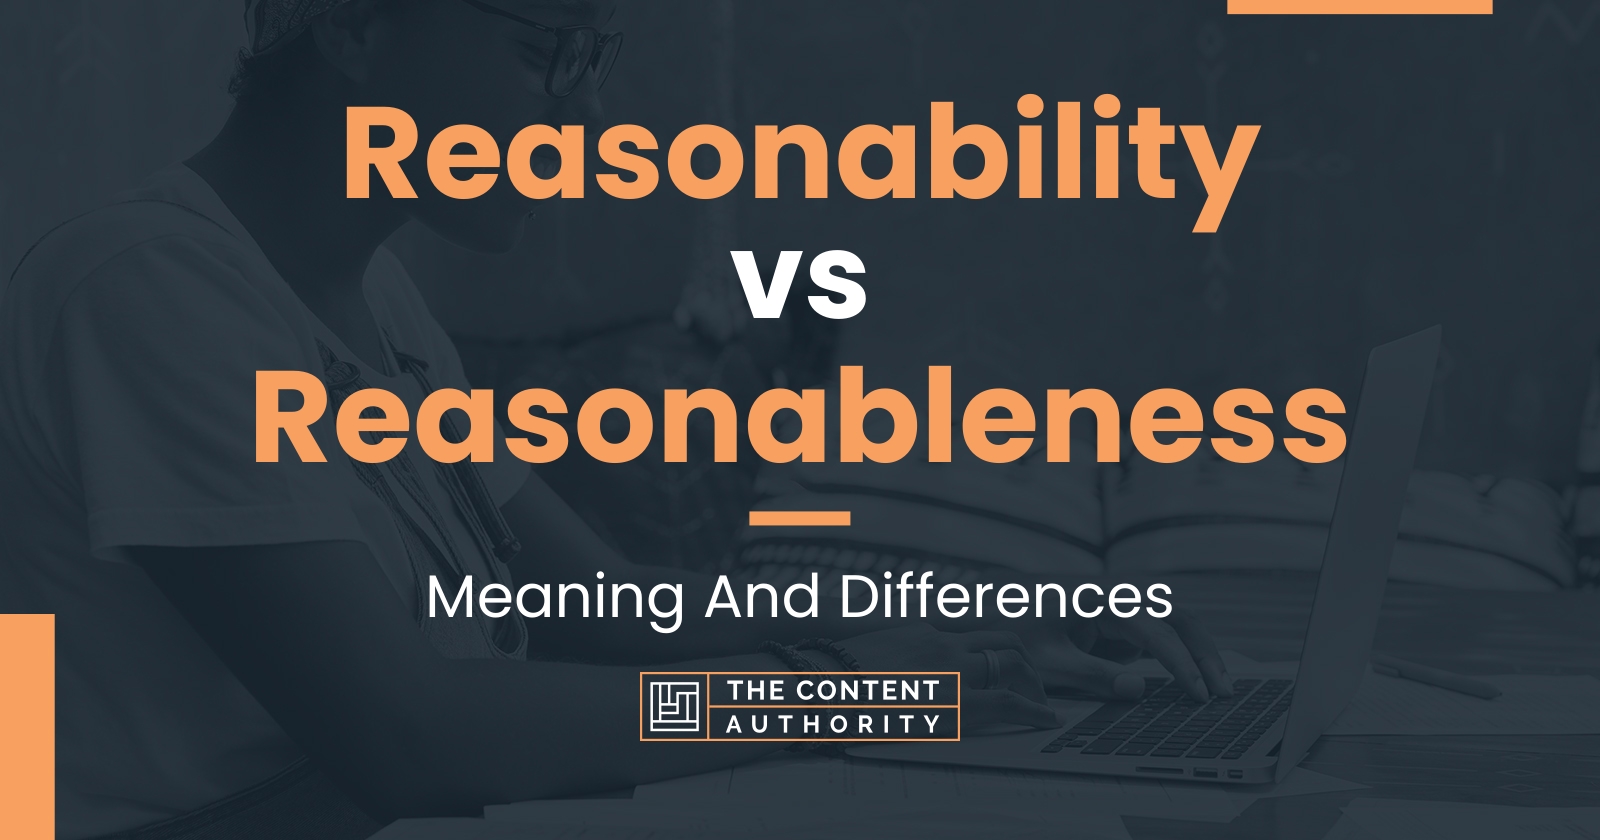 Reasonability vs Reasonableness: Meaning And Differences